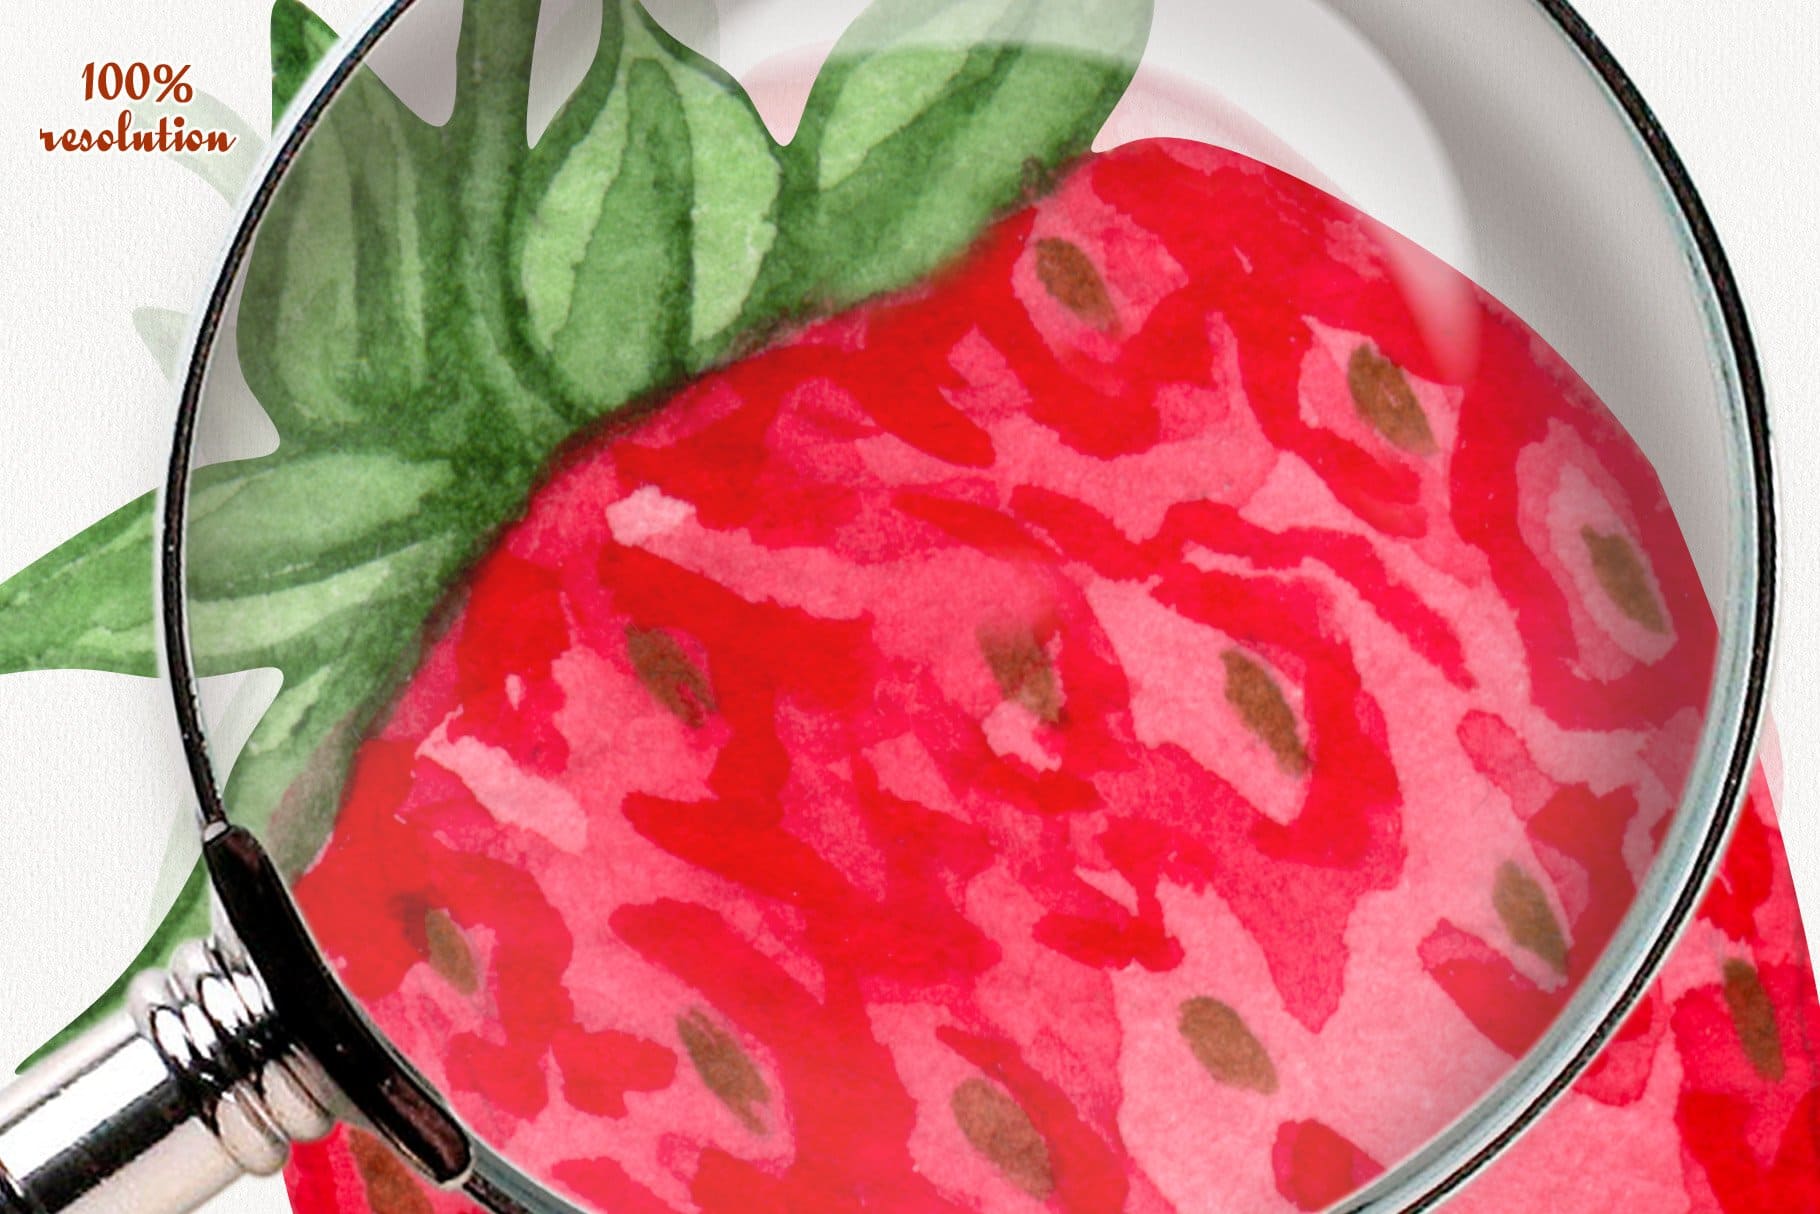 Strawberry in red-pink colors is drawn close-up.